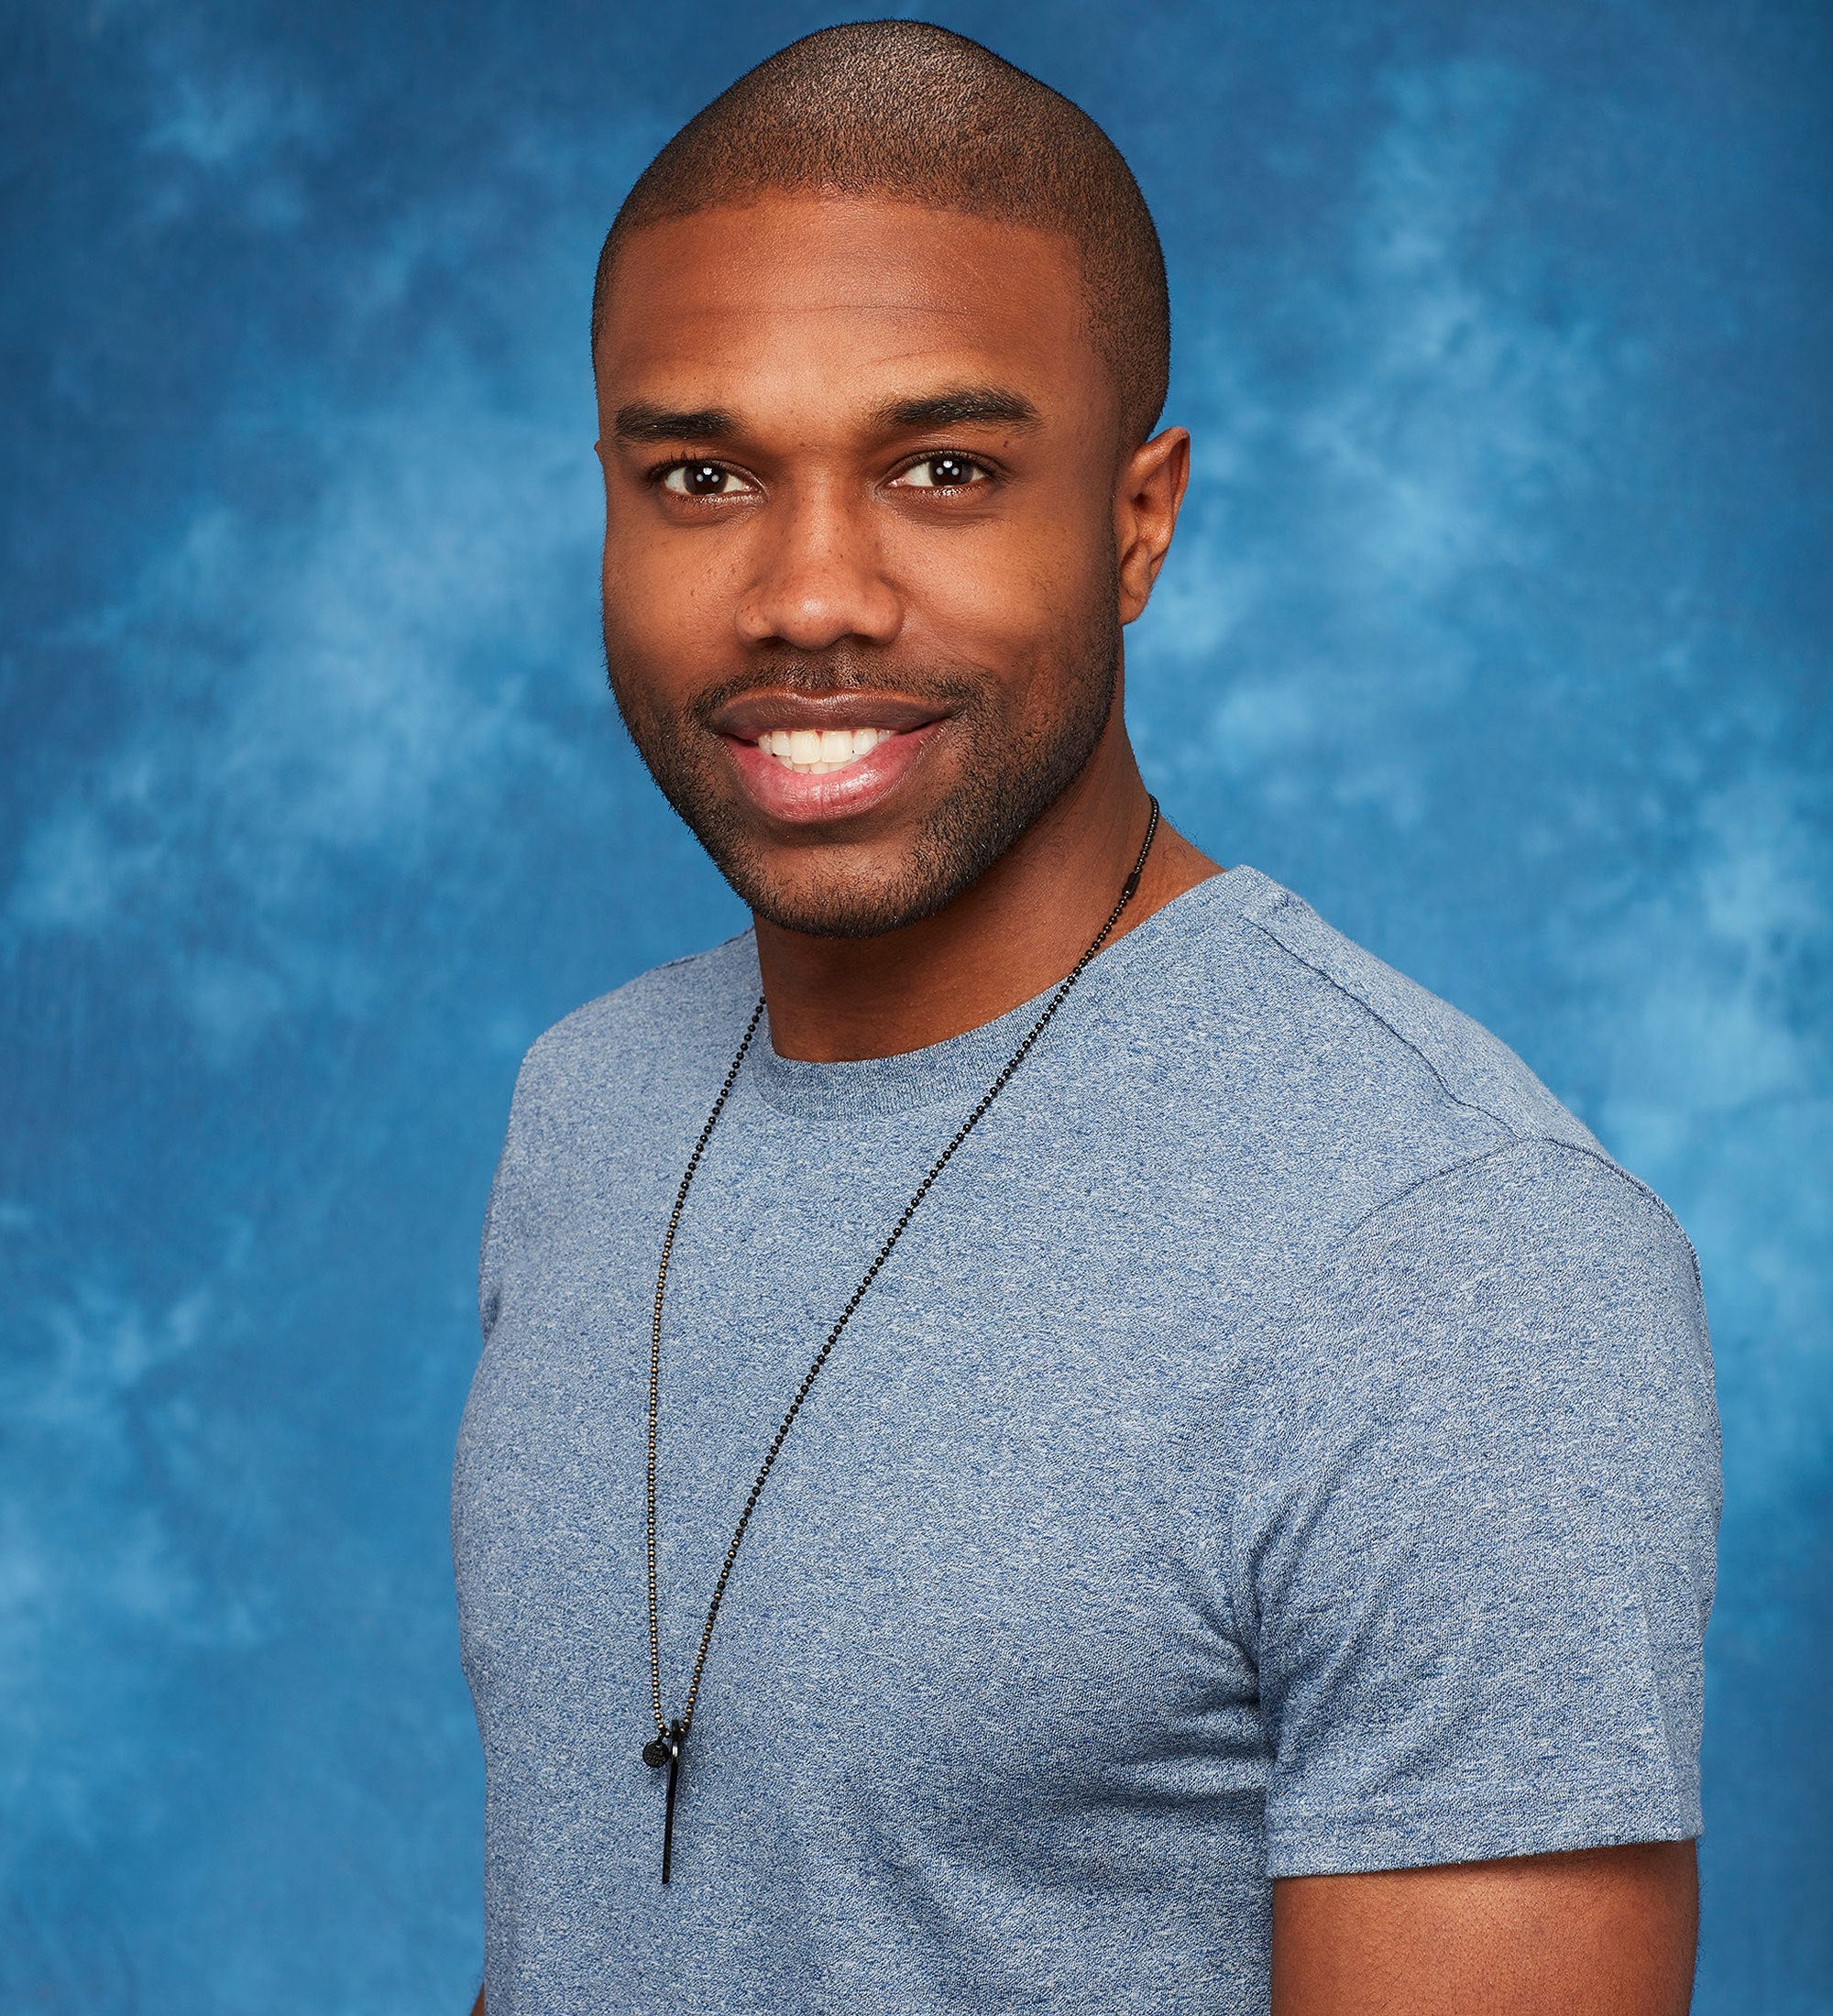 Bachelor In Paradise’s DeMario Jackson Was Allegedly Filmed In Sexual Encounter: Sources